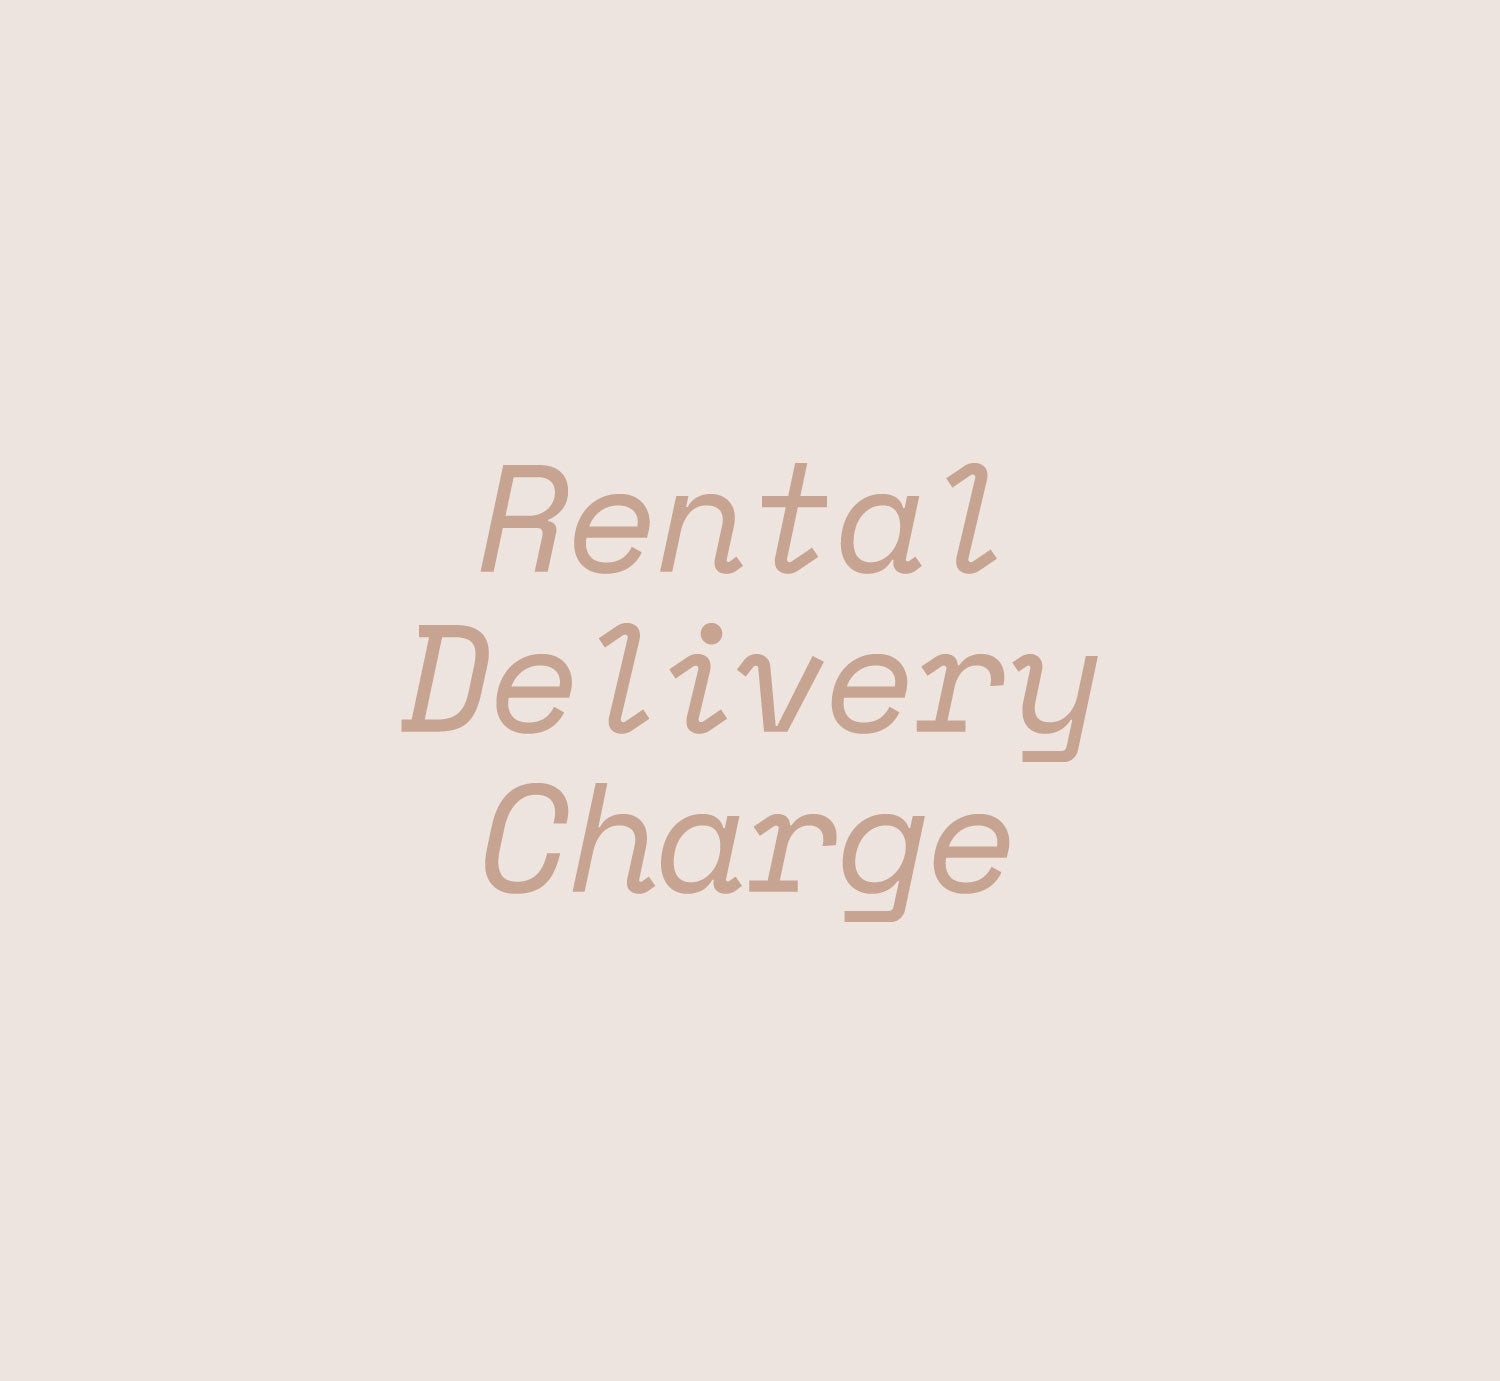 Rental Delivery Charge - Rehaus